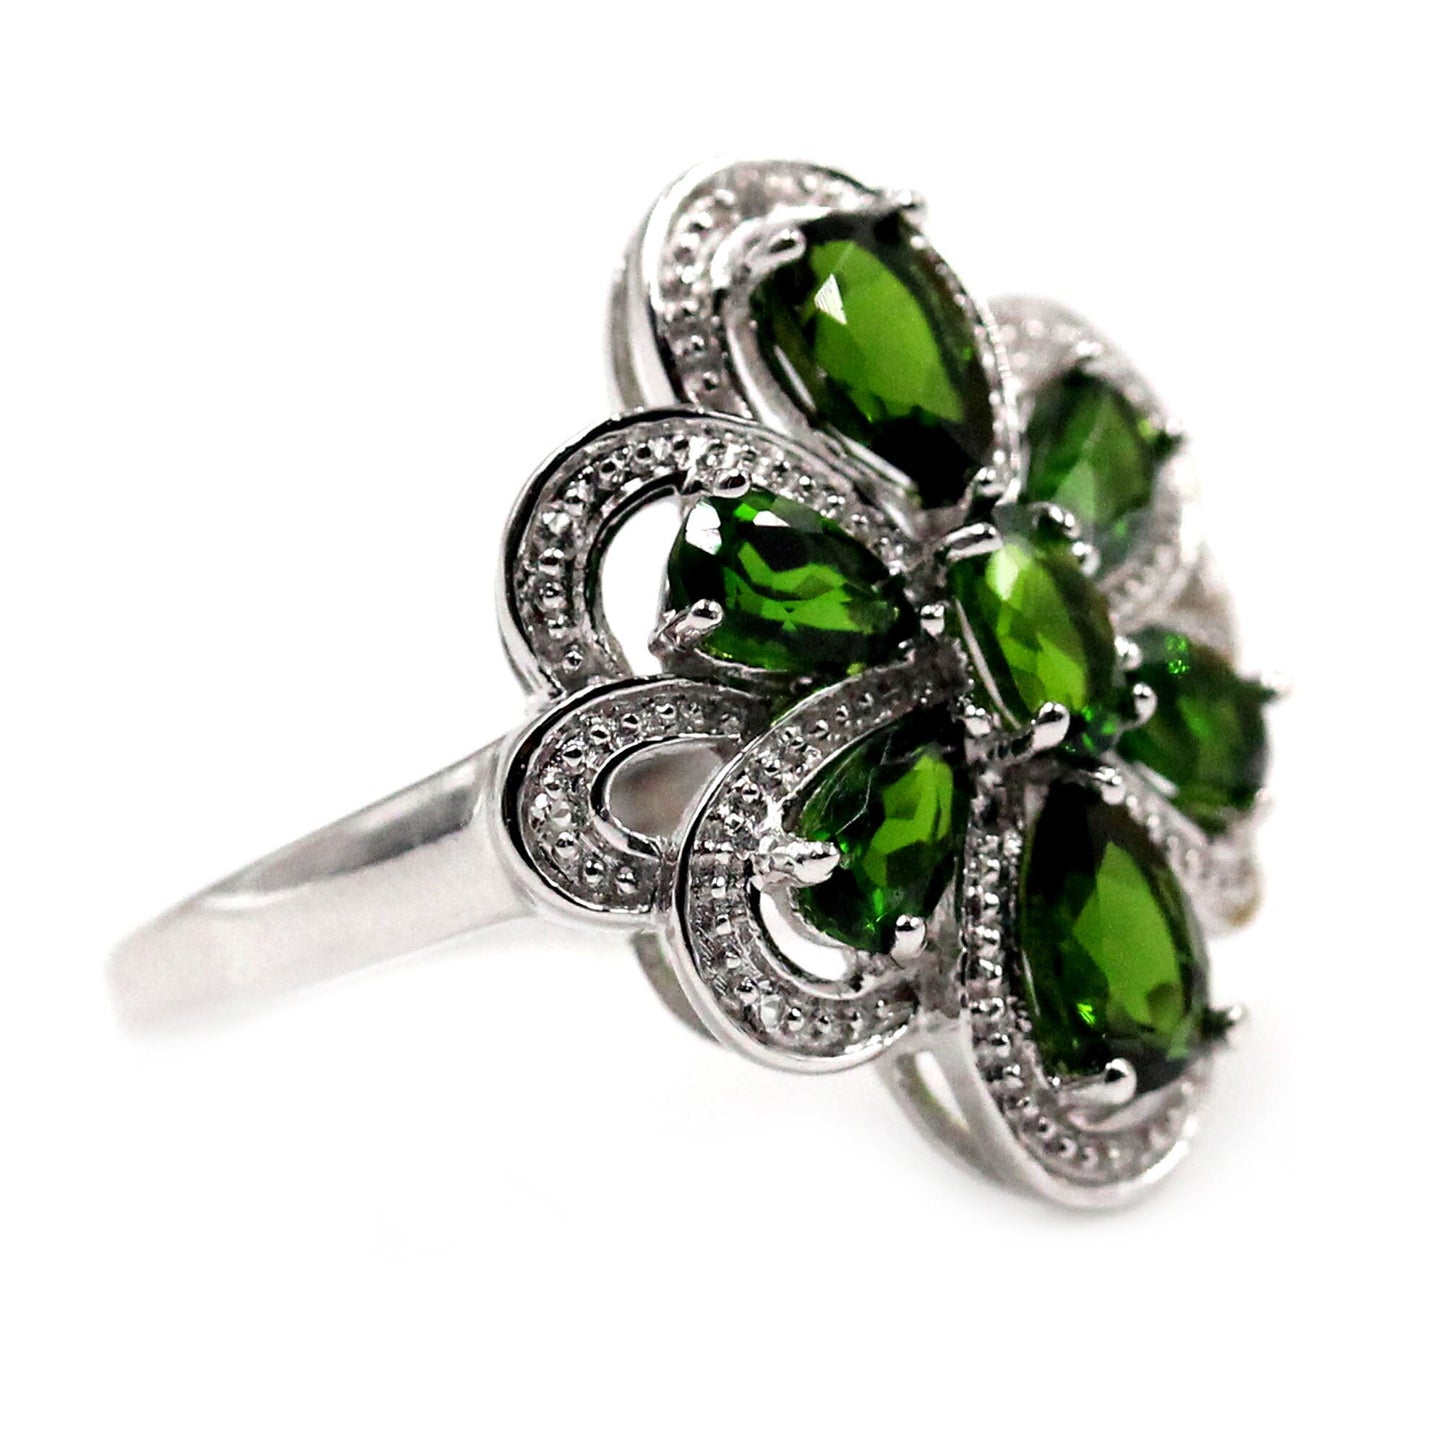 Chrome Diopside Gemstone Ring, 925 Sterling Silver Ring, Engagement Ring, Birthstone Ring-Gemstone Jewelry Anniversary Gift-Gift For Her